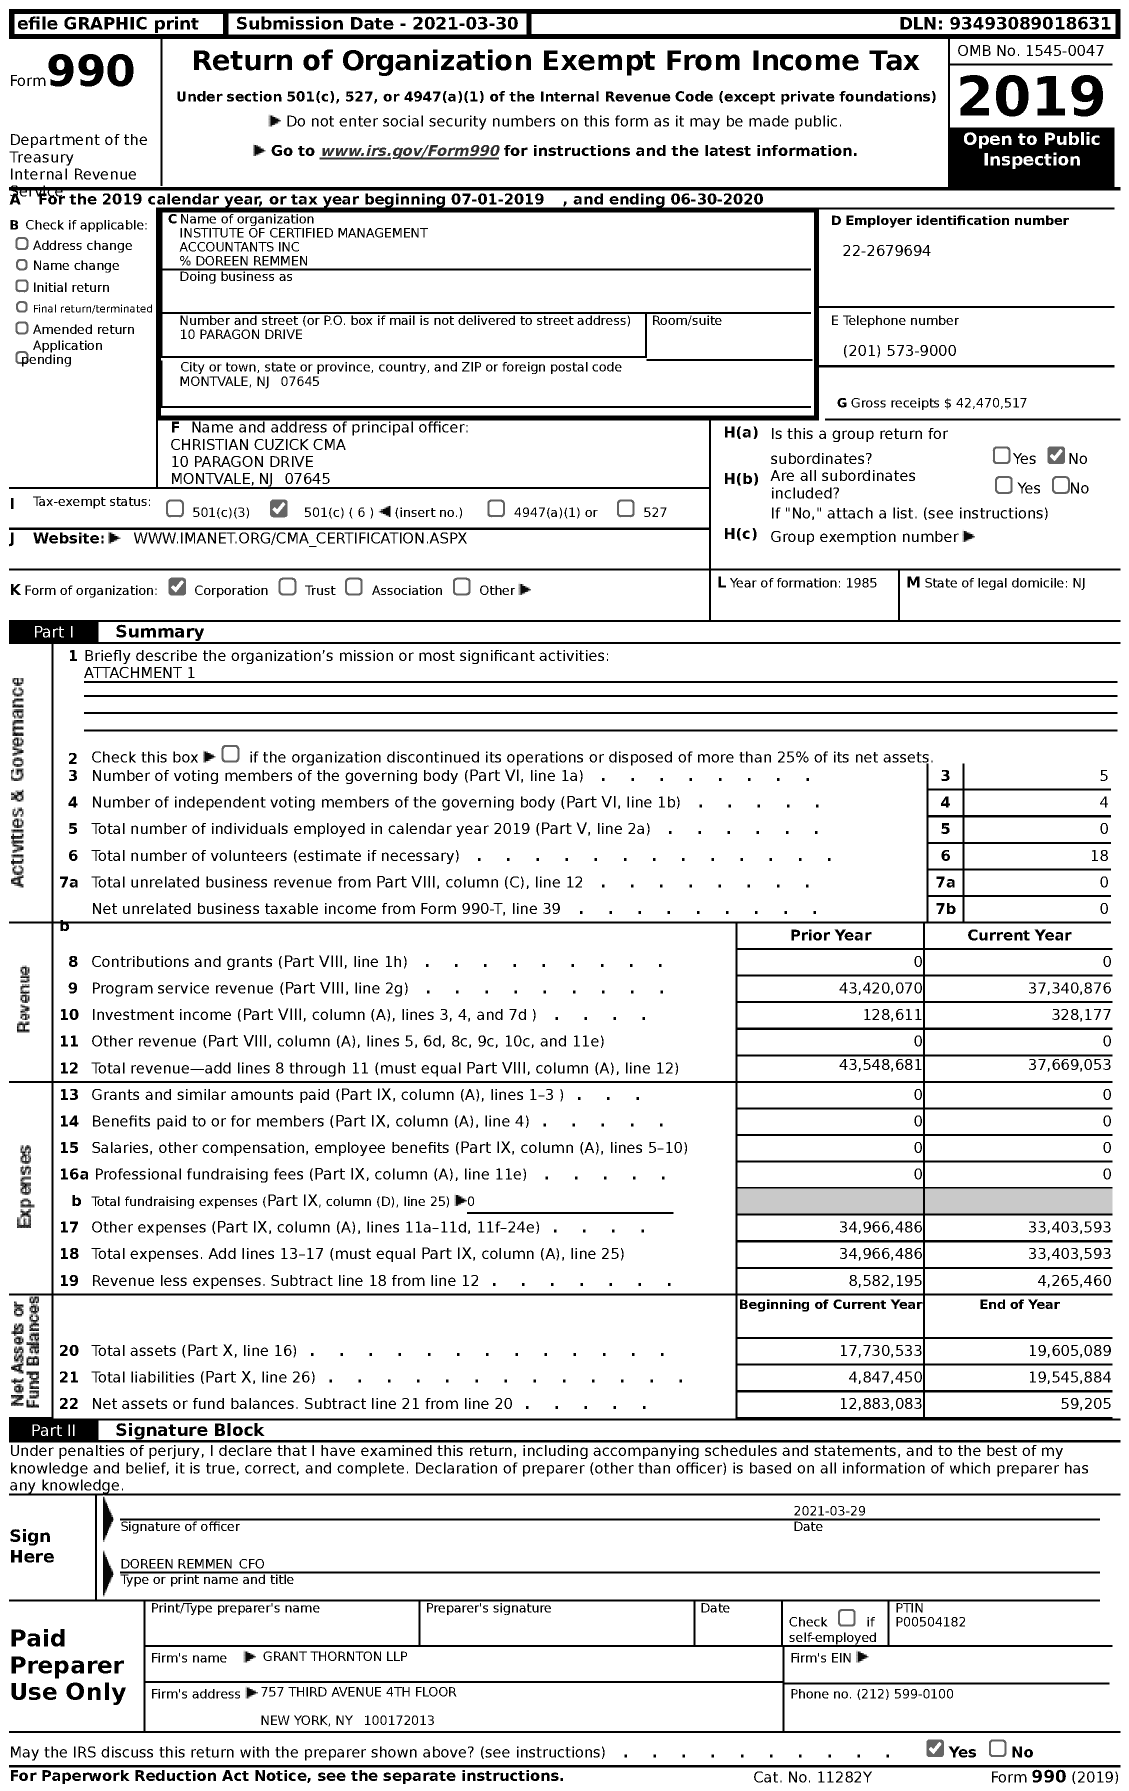 Image of first page of 2019 Form 990 for Institute of Certified MANAGeMENT ACCOUNTANTS (IMA)